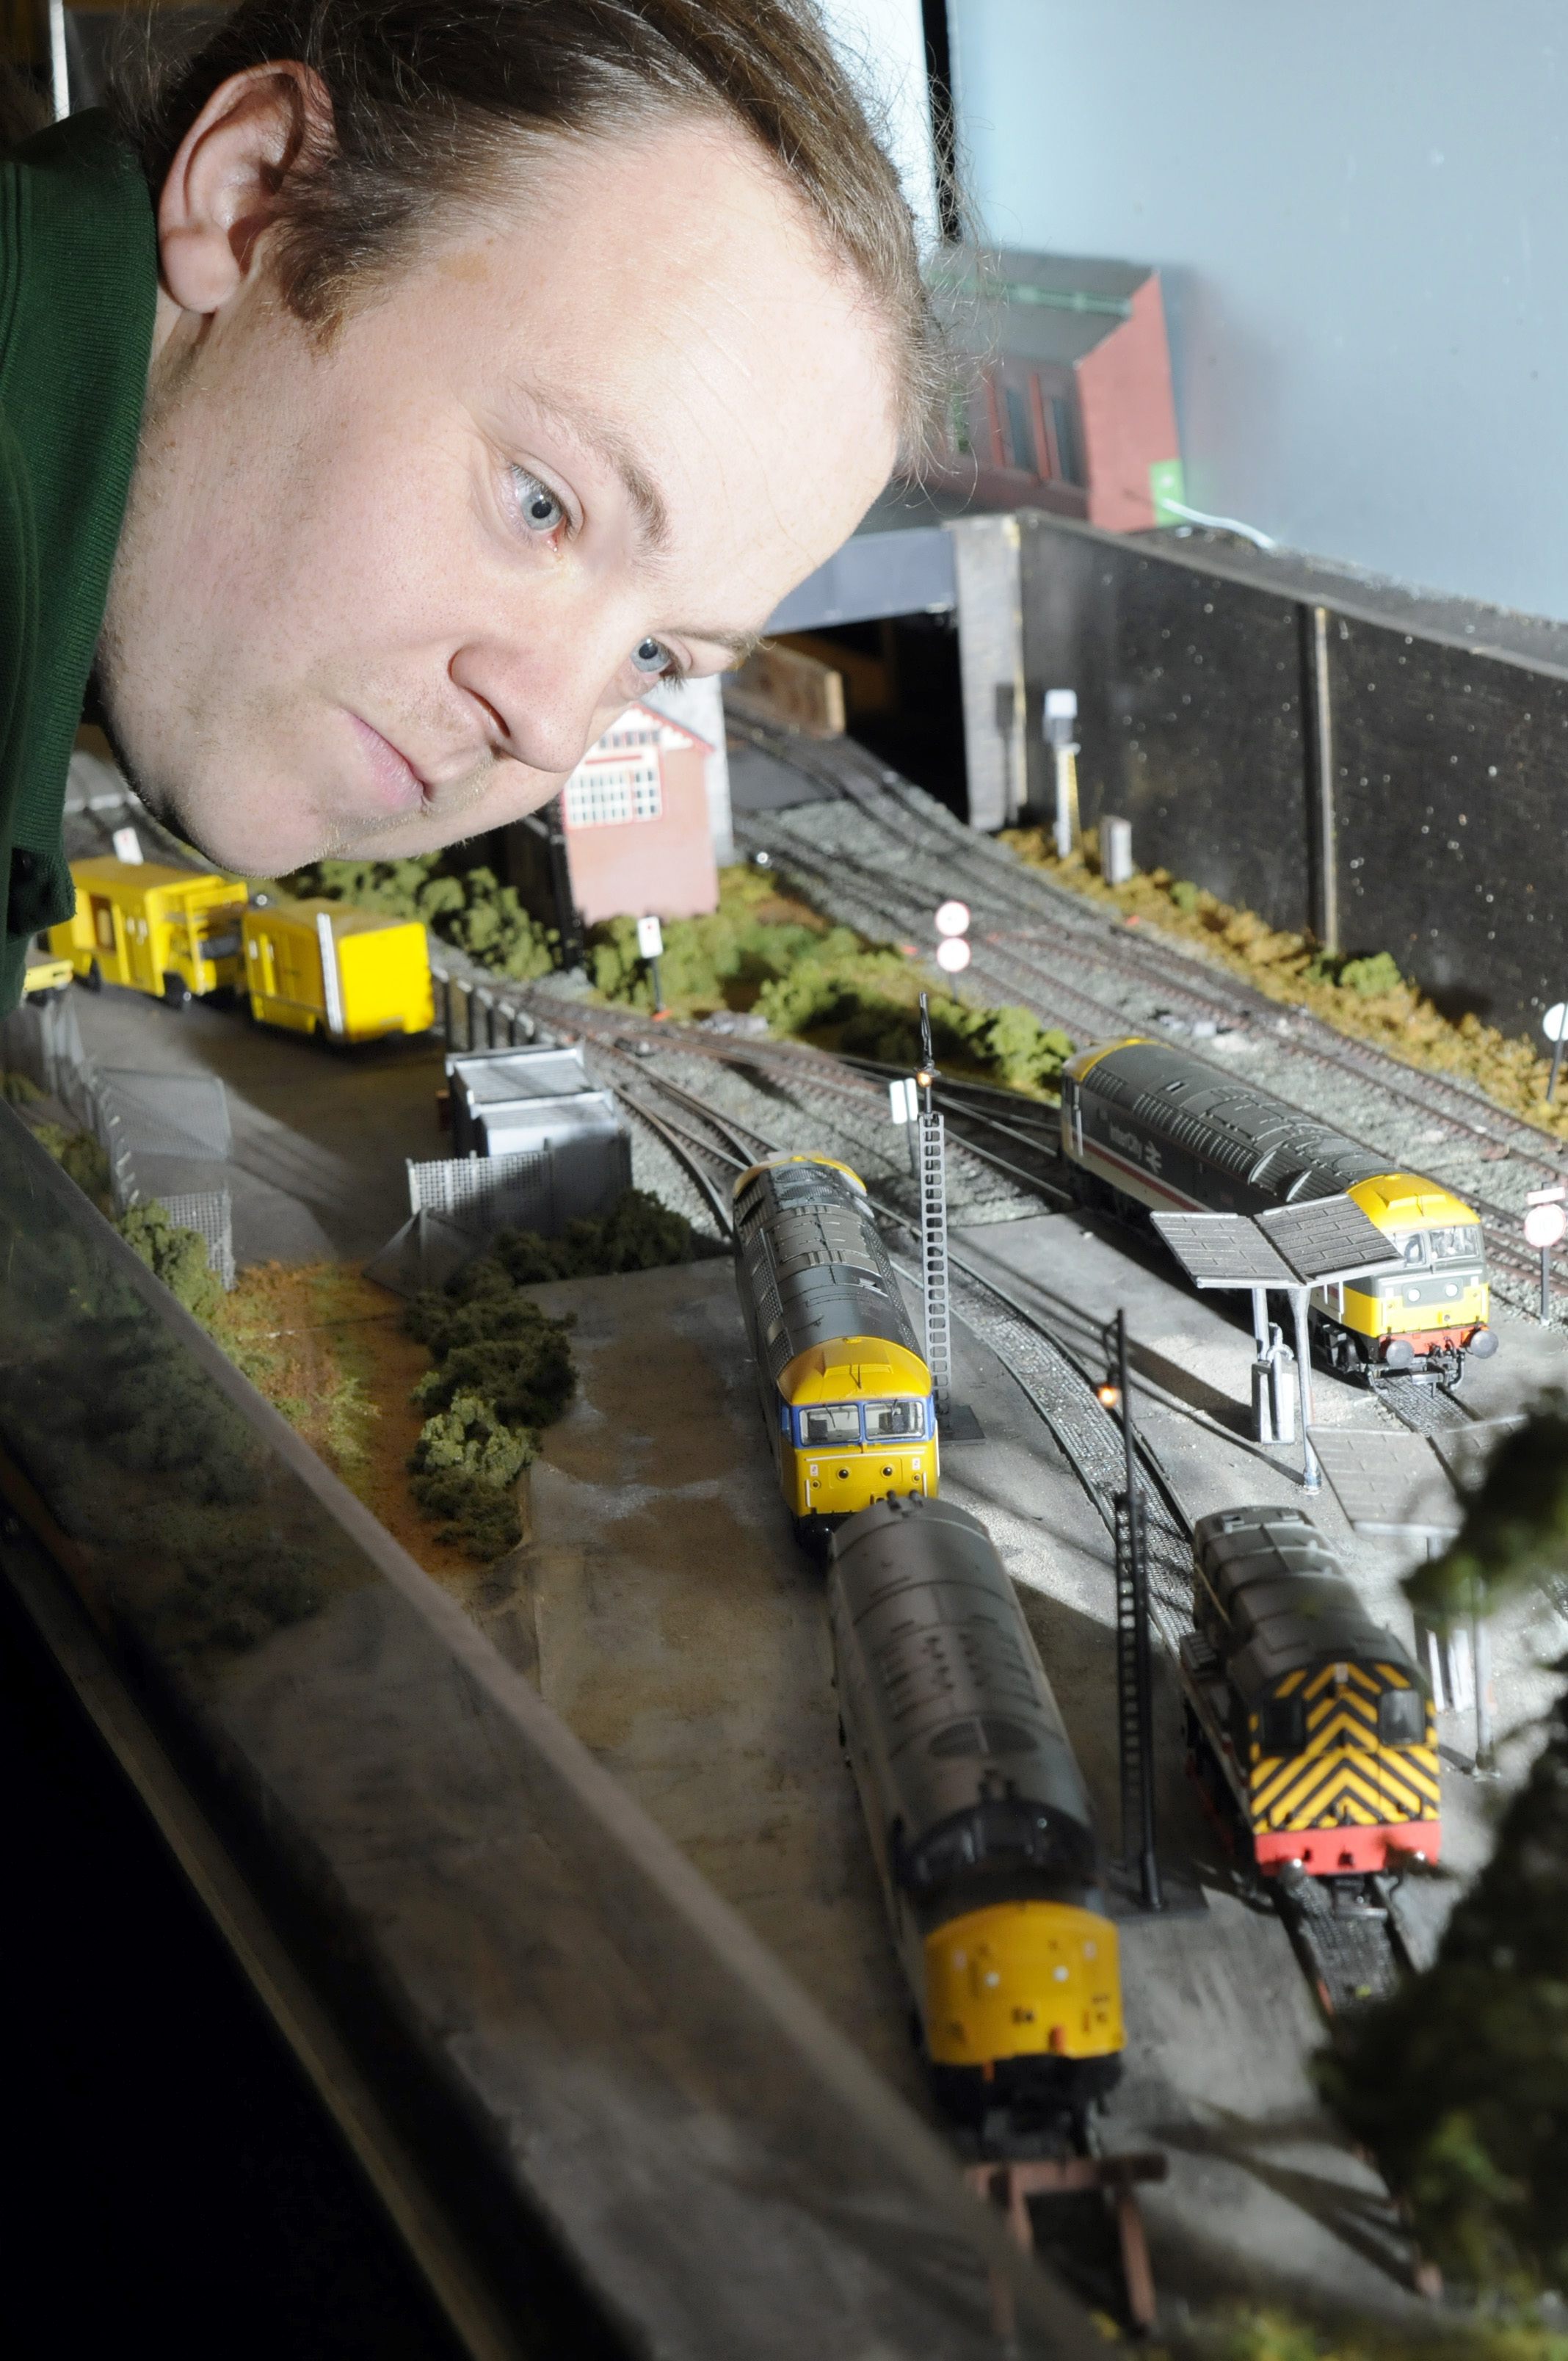 Model railway exhibits to take over village hall - St Helens Star